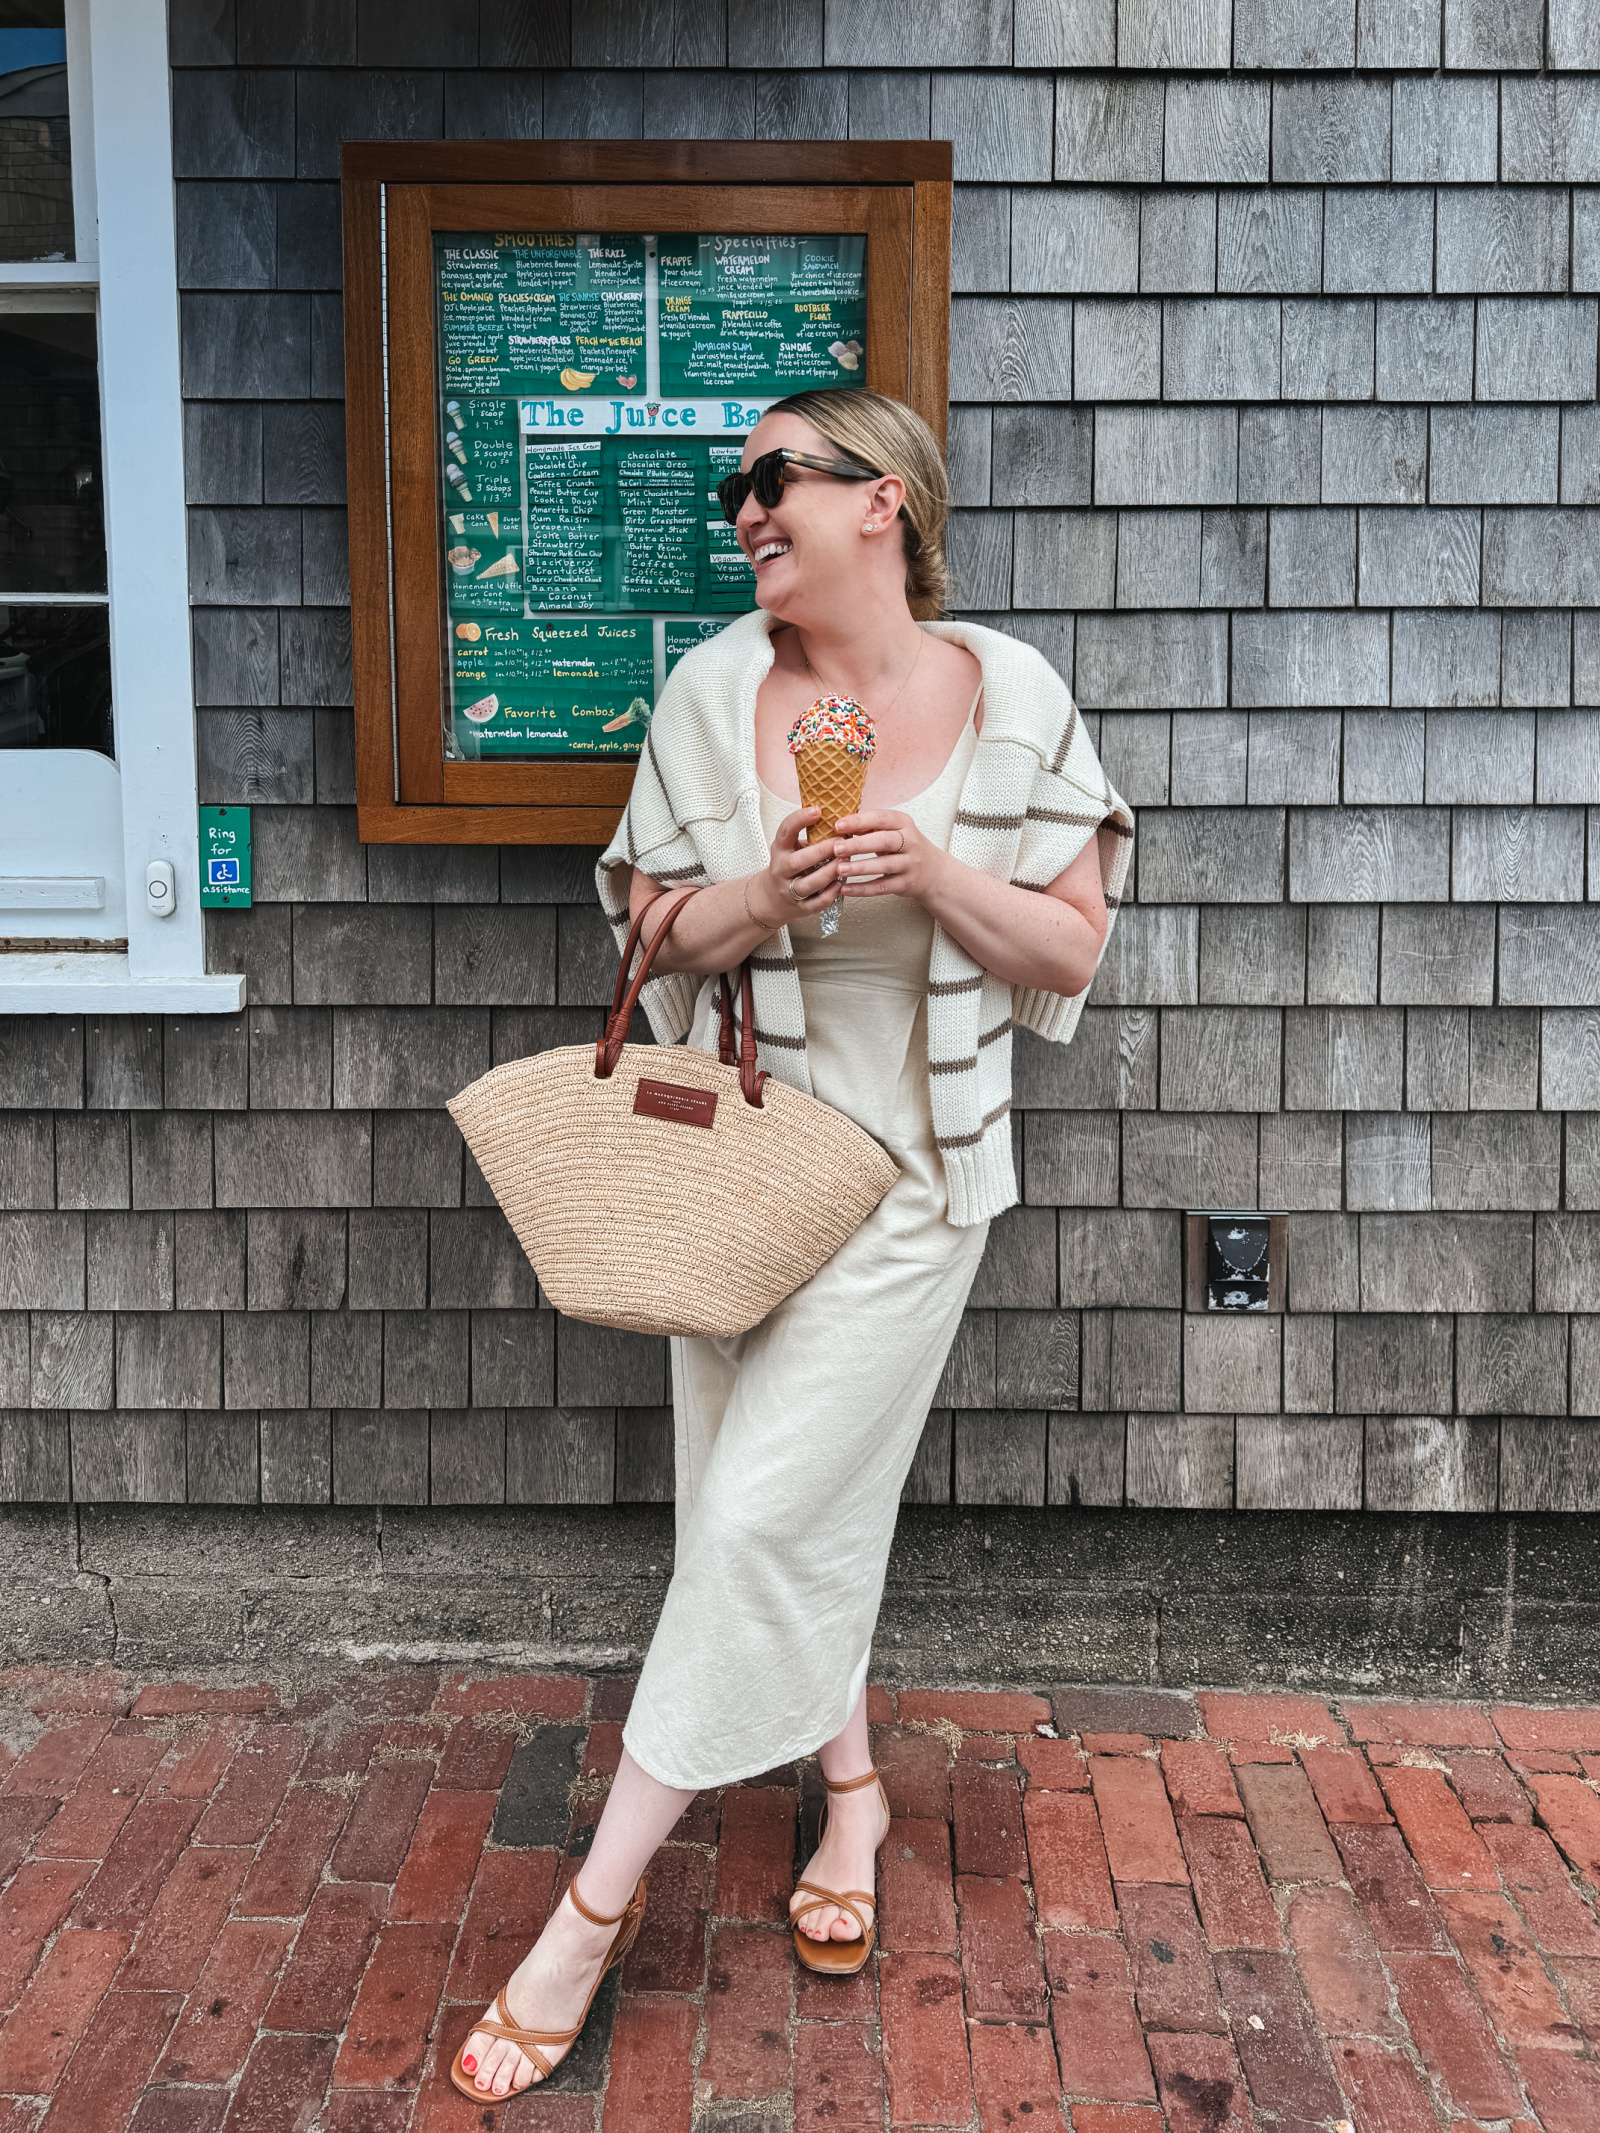 What To Do on Nantucket